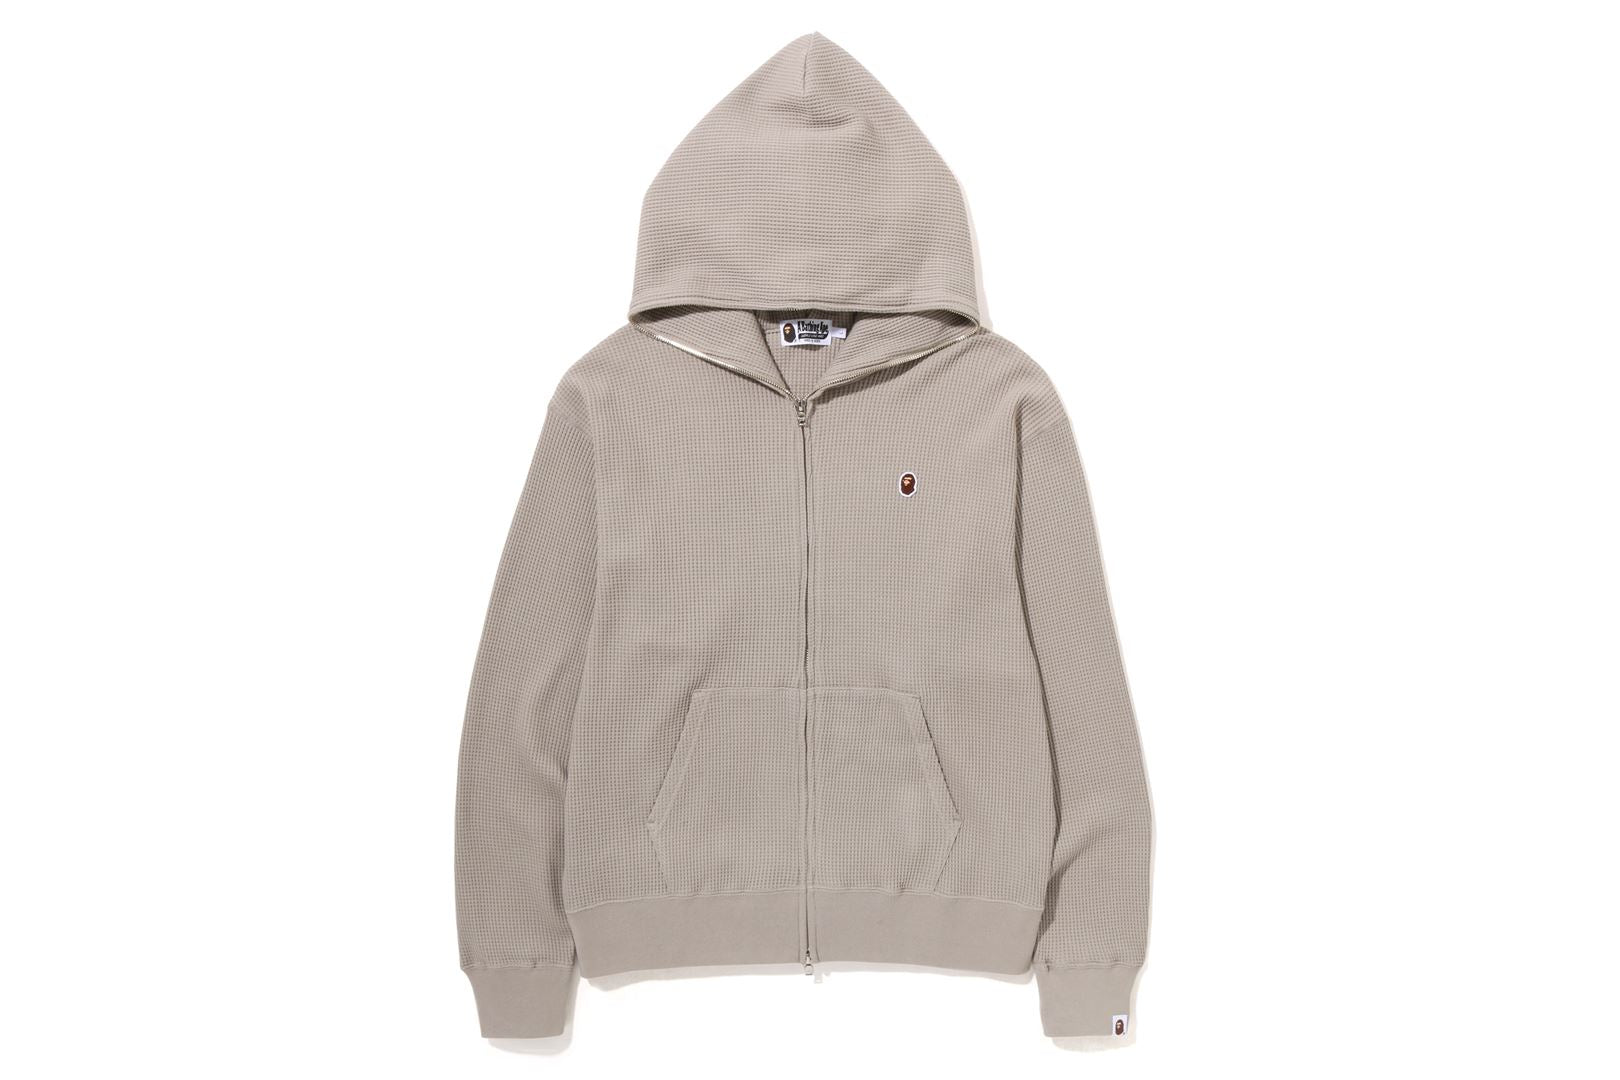 APE HEAD ONE POINT THERMAL RELAXED FIT FULL ZIP HOODIE – uk.bape.com